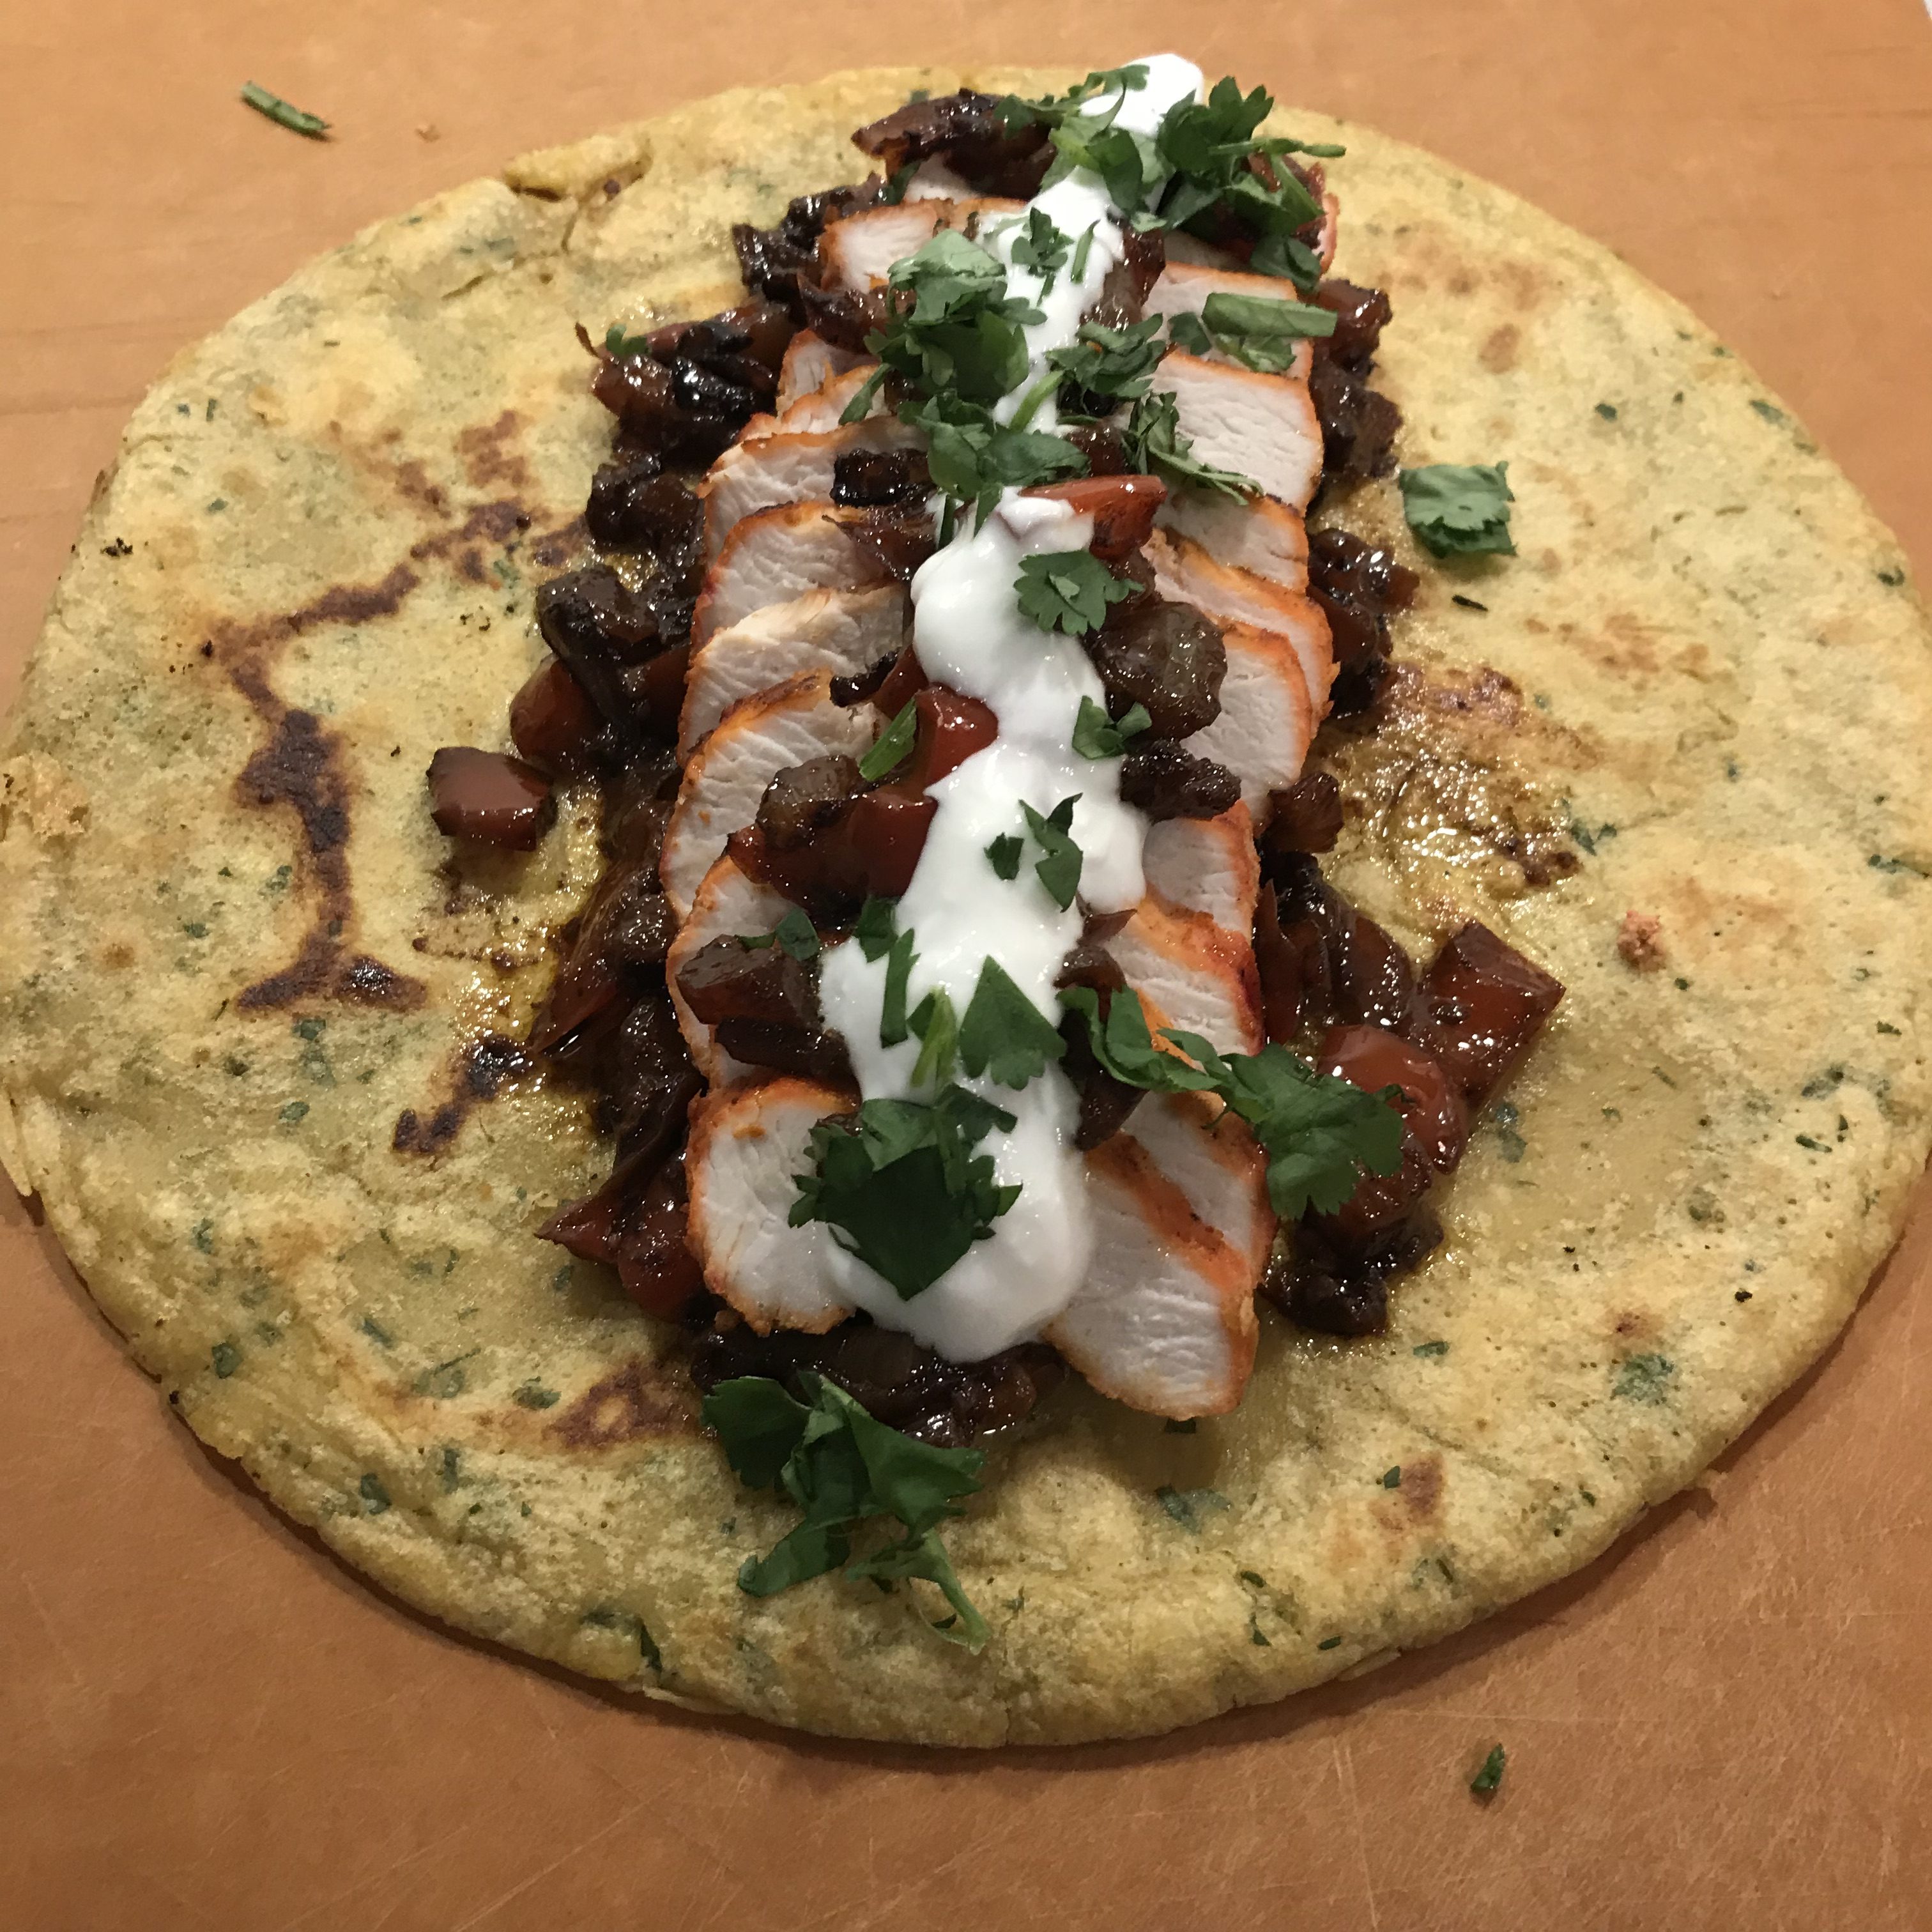 Wrap it up with Chickpea Flour Tortillas